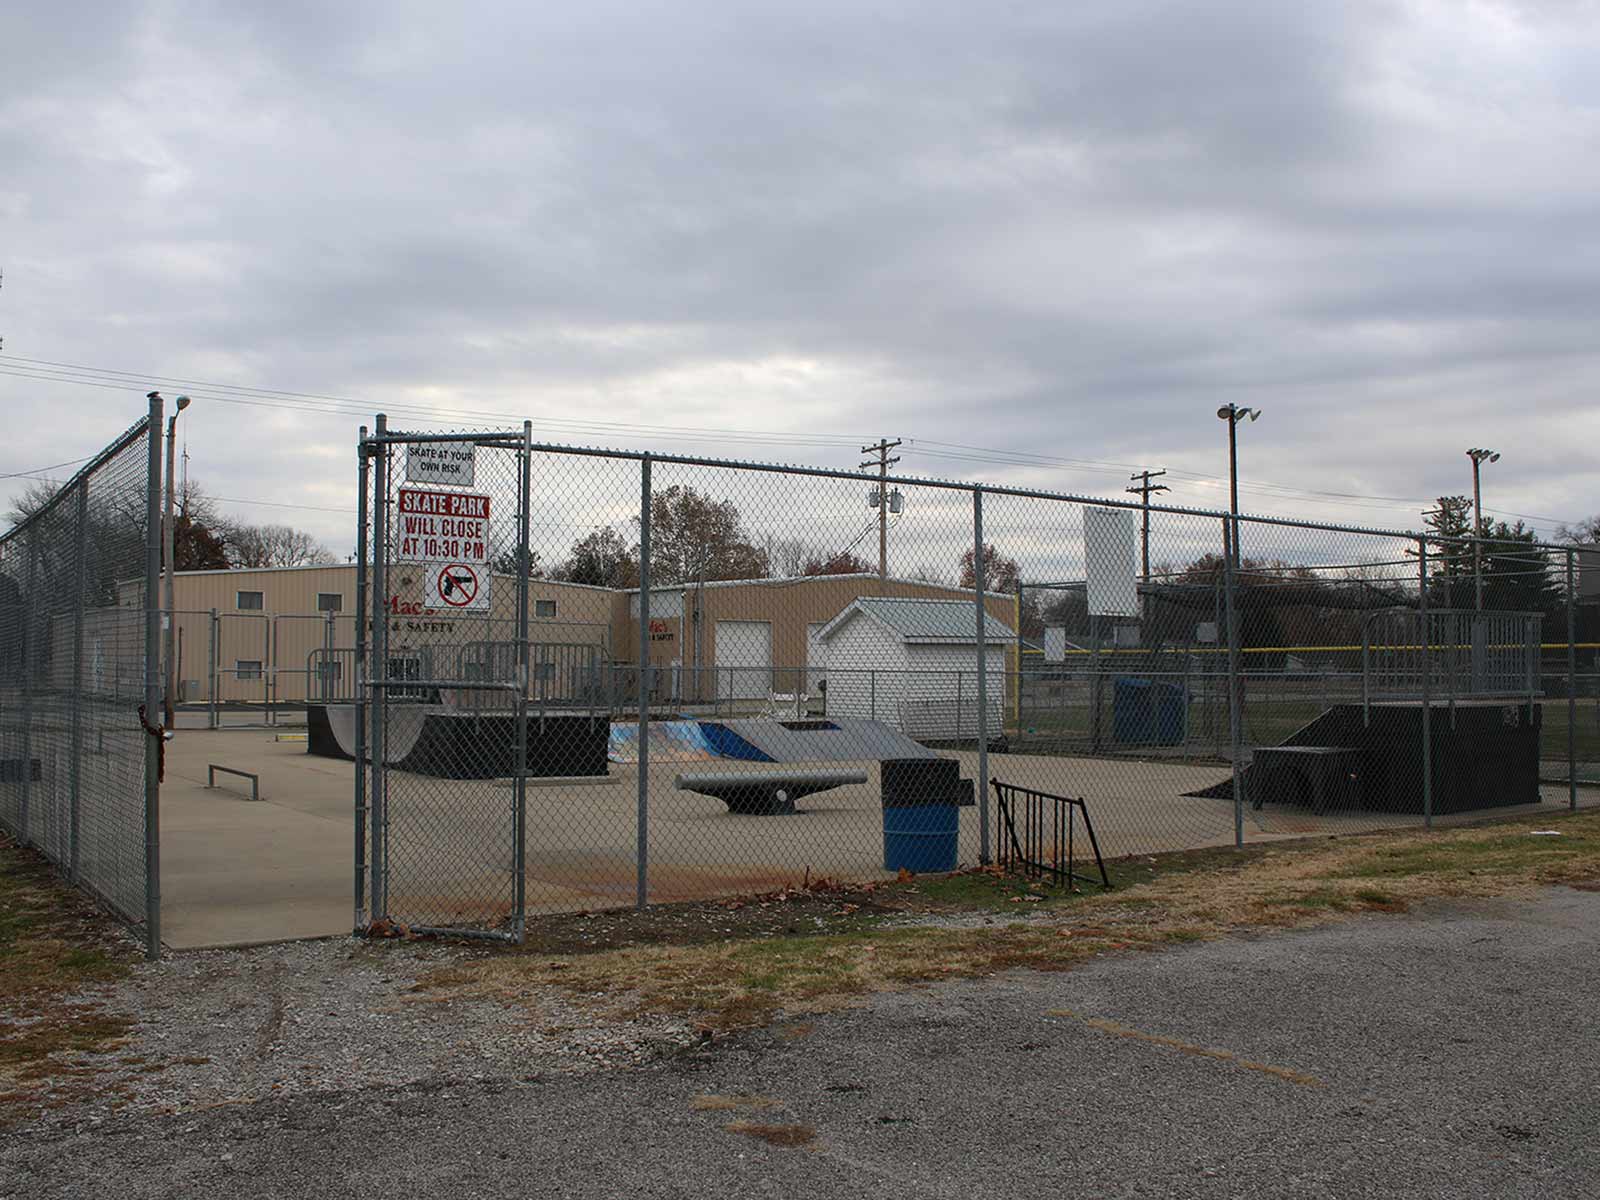 view from outside the fence of the Skate Park